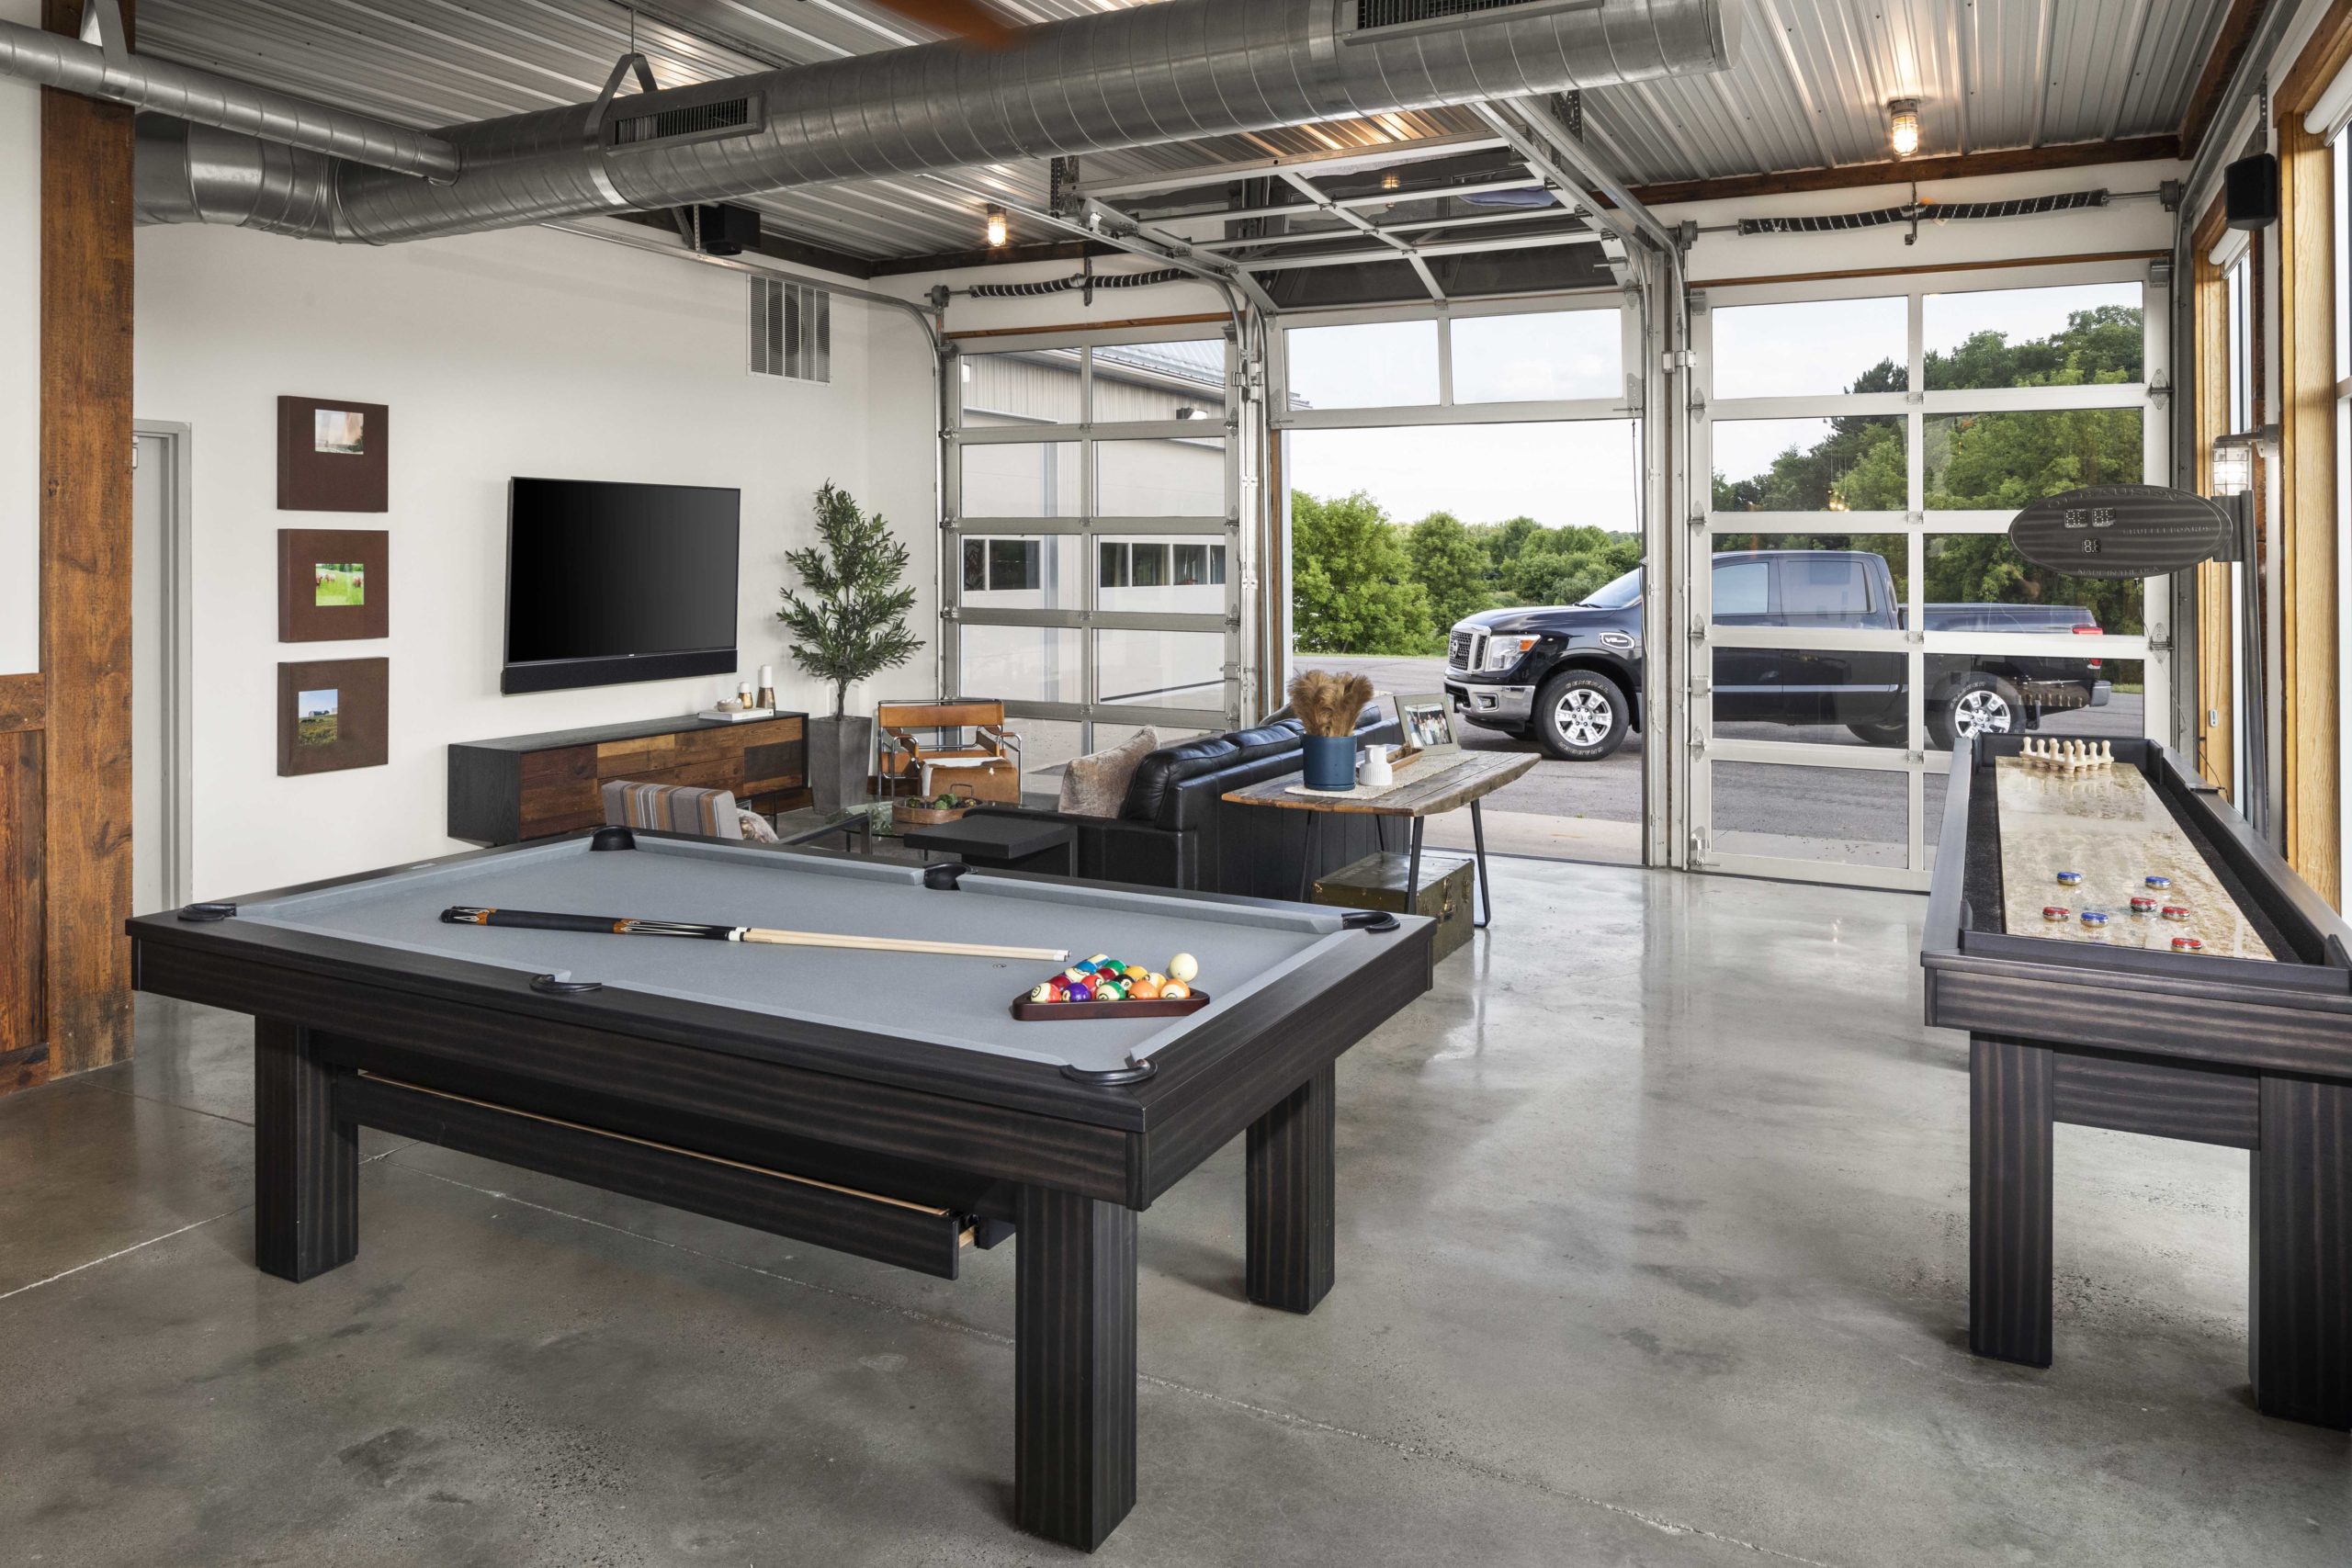 A contemporary game room with a pool table and foosball table in a farmhouse setting.